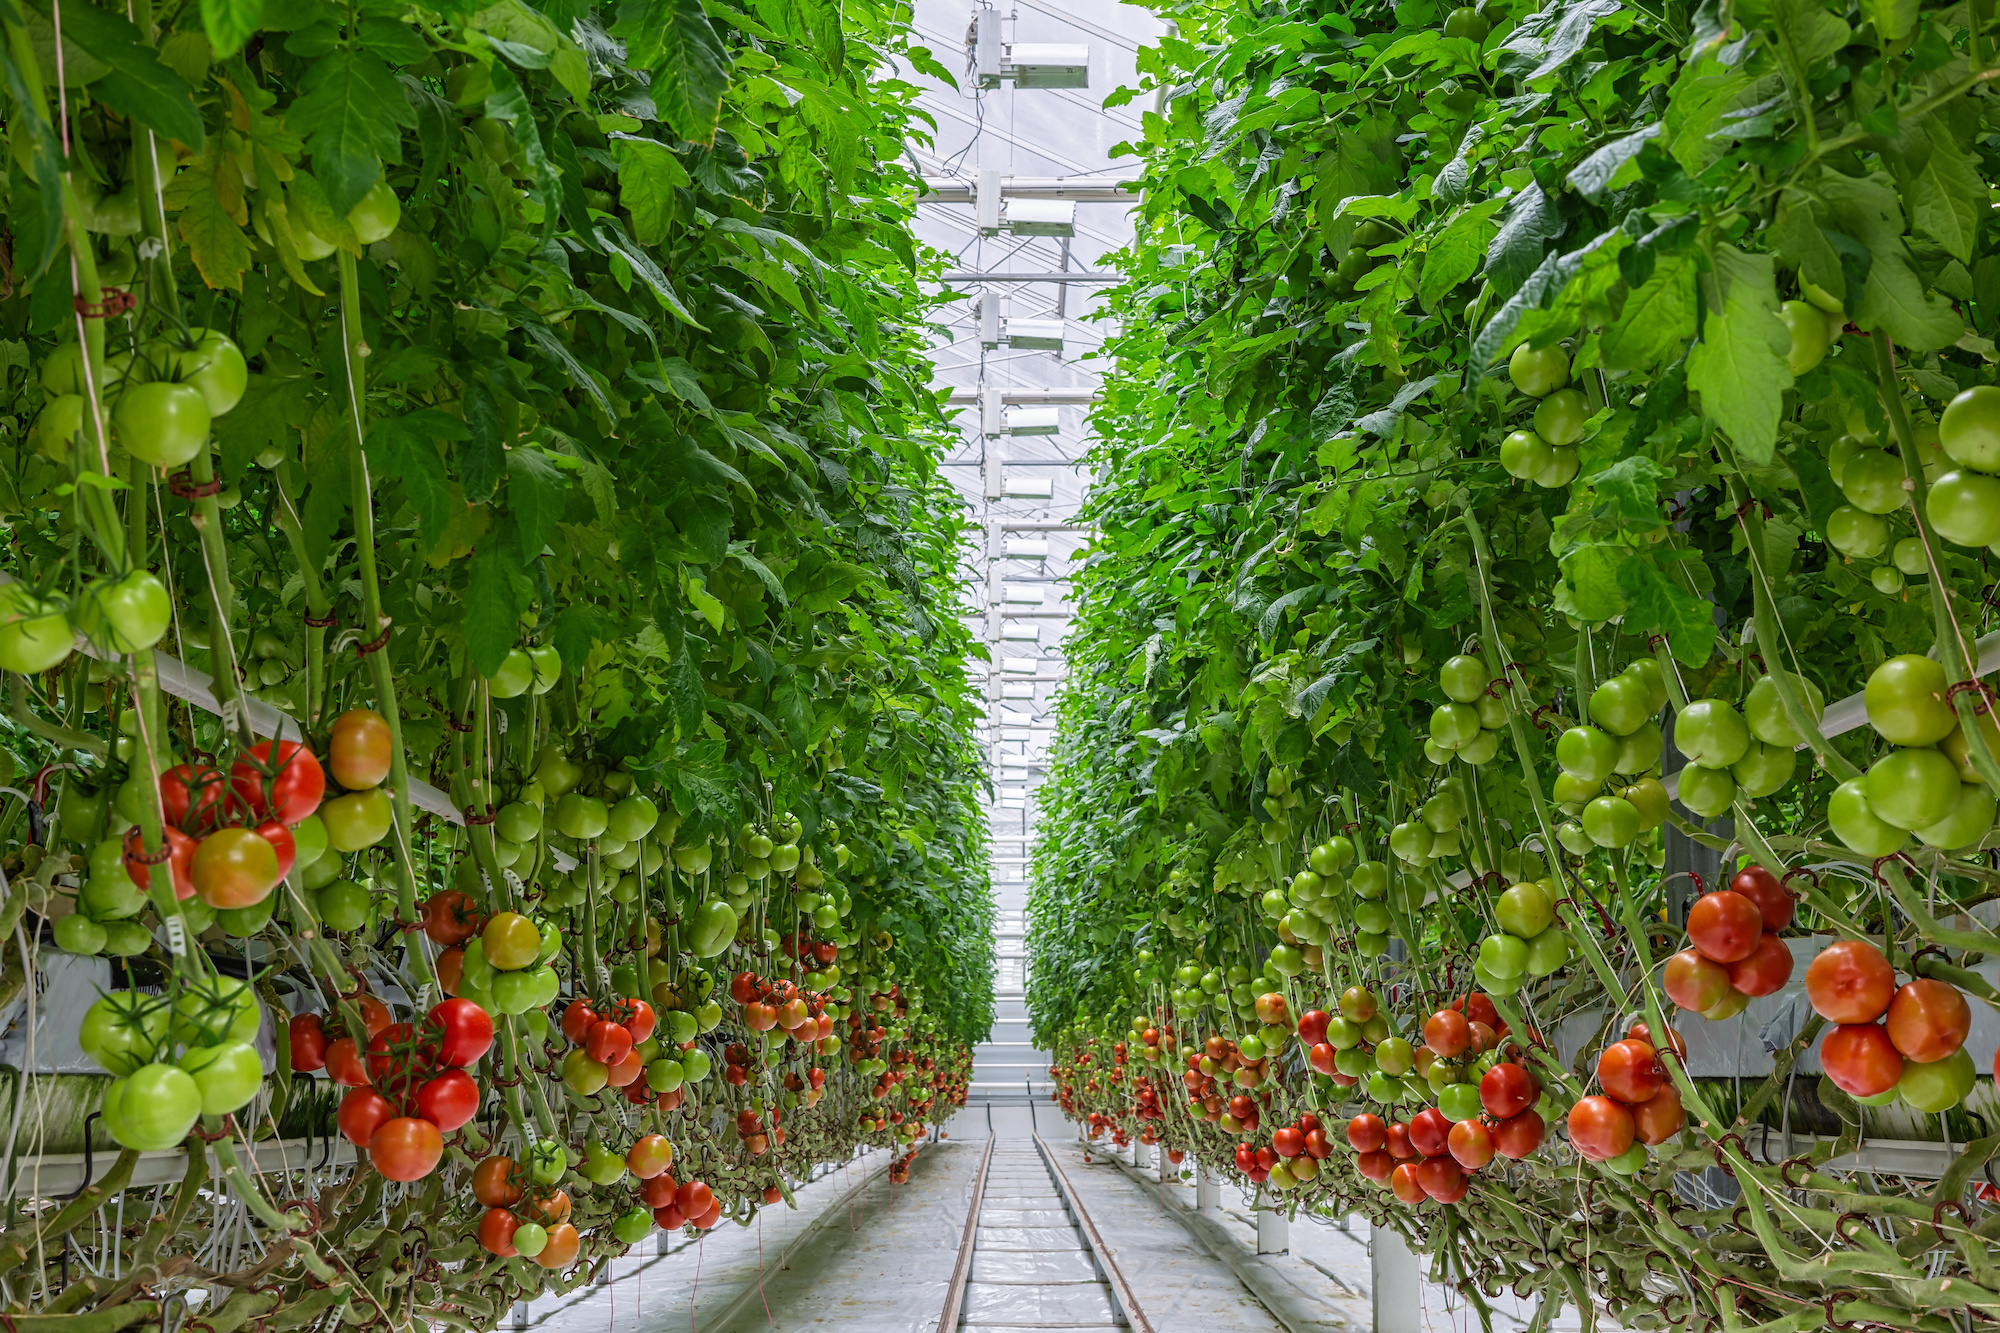 Compact growth saves space and is therefore suitable for urban agriculture. (Image: Adobe Stock)